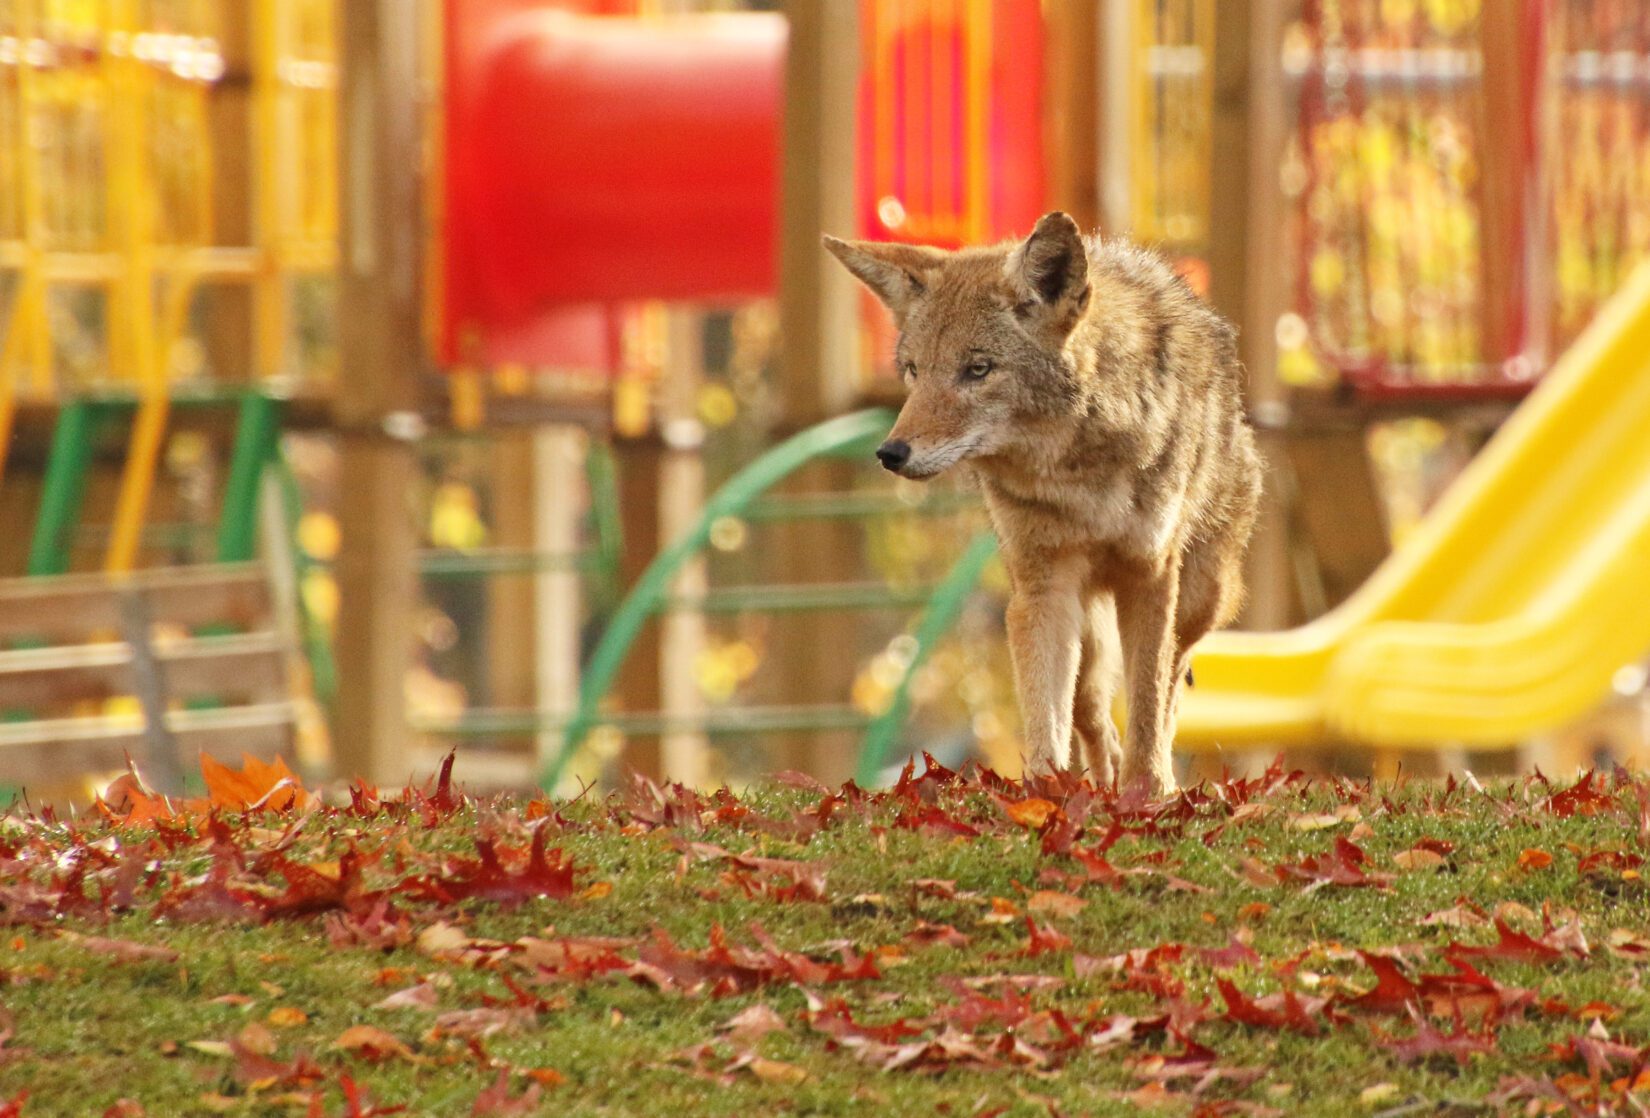 Coyote walking through fallen leaves at playground